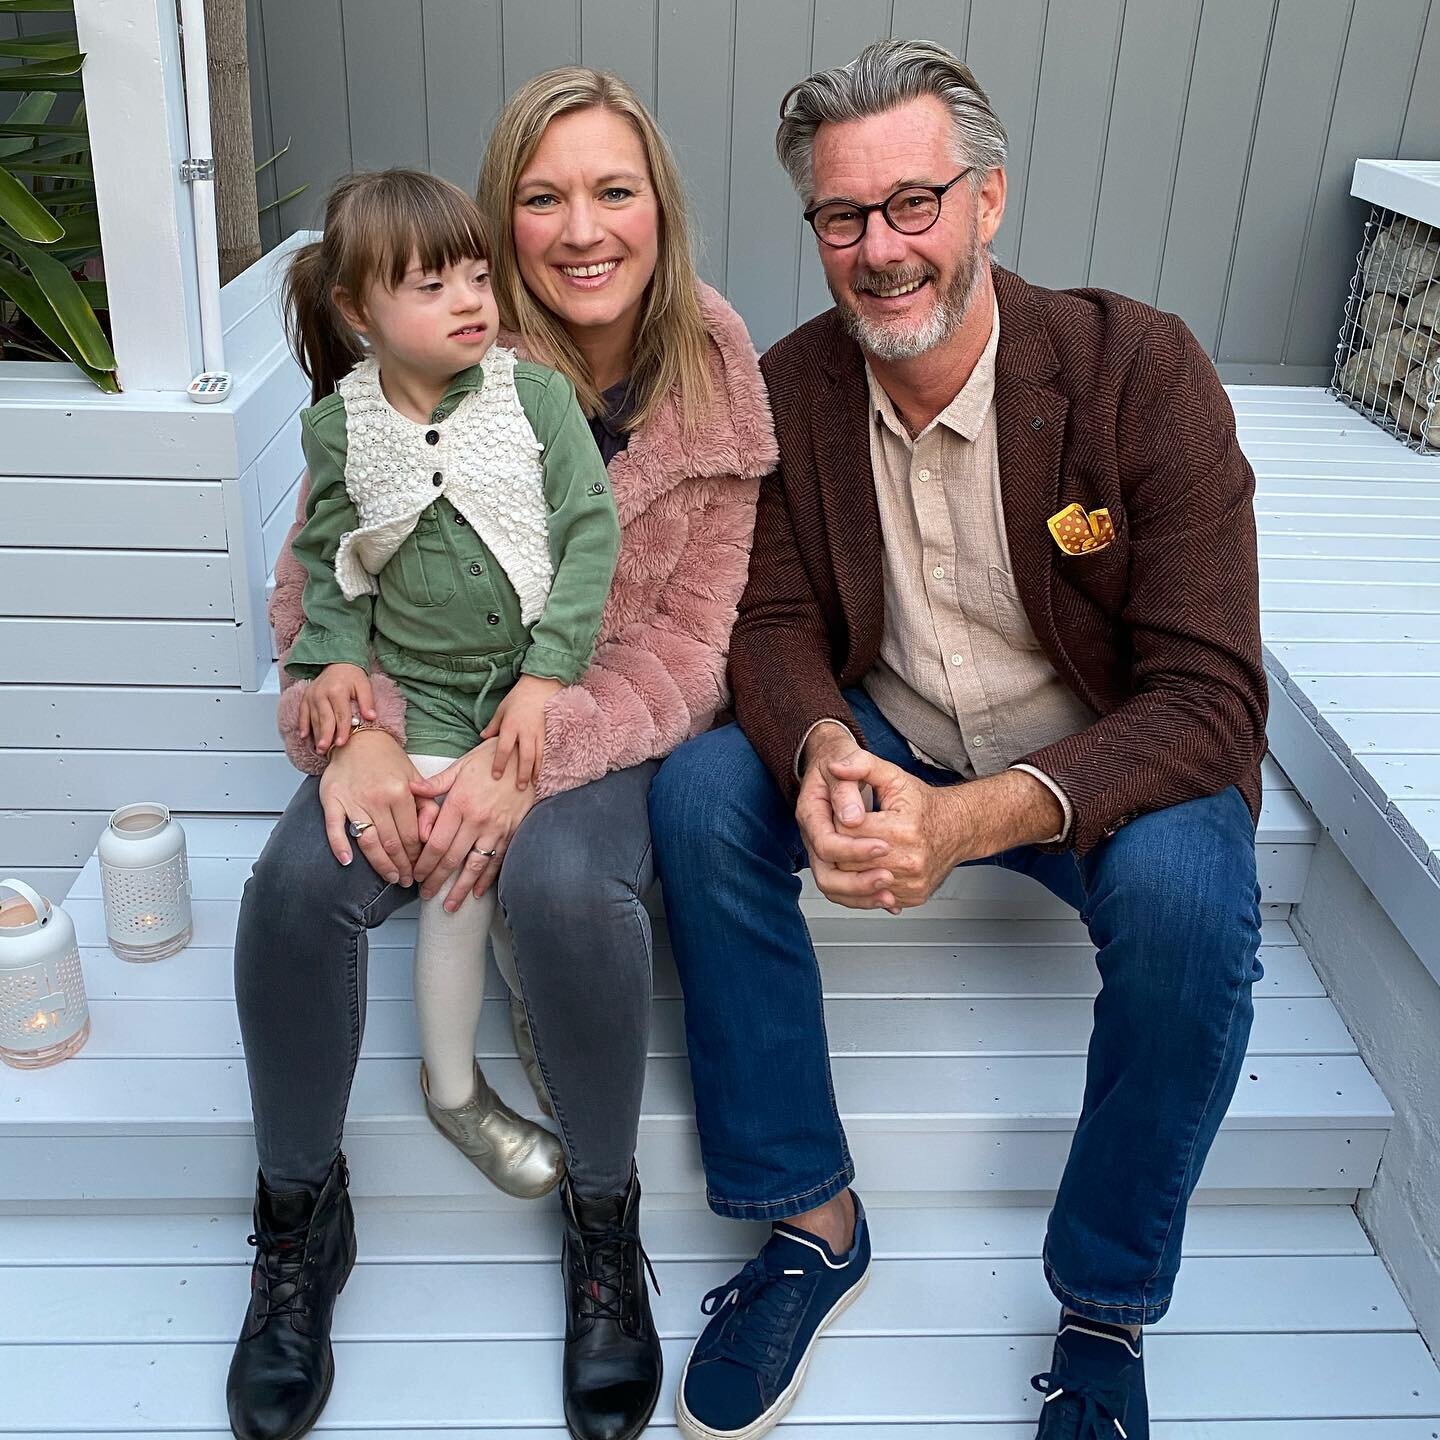 My gratitude cup is officially overflowing! Earlier this winter, the amazing crew from @livingroomtv visited us to talk all things winter hygge, celebrate life with a little extra and turn our backyard into a wonderfully cozy, Nordic hideaway. So luc